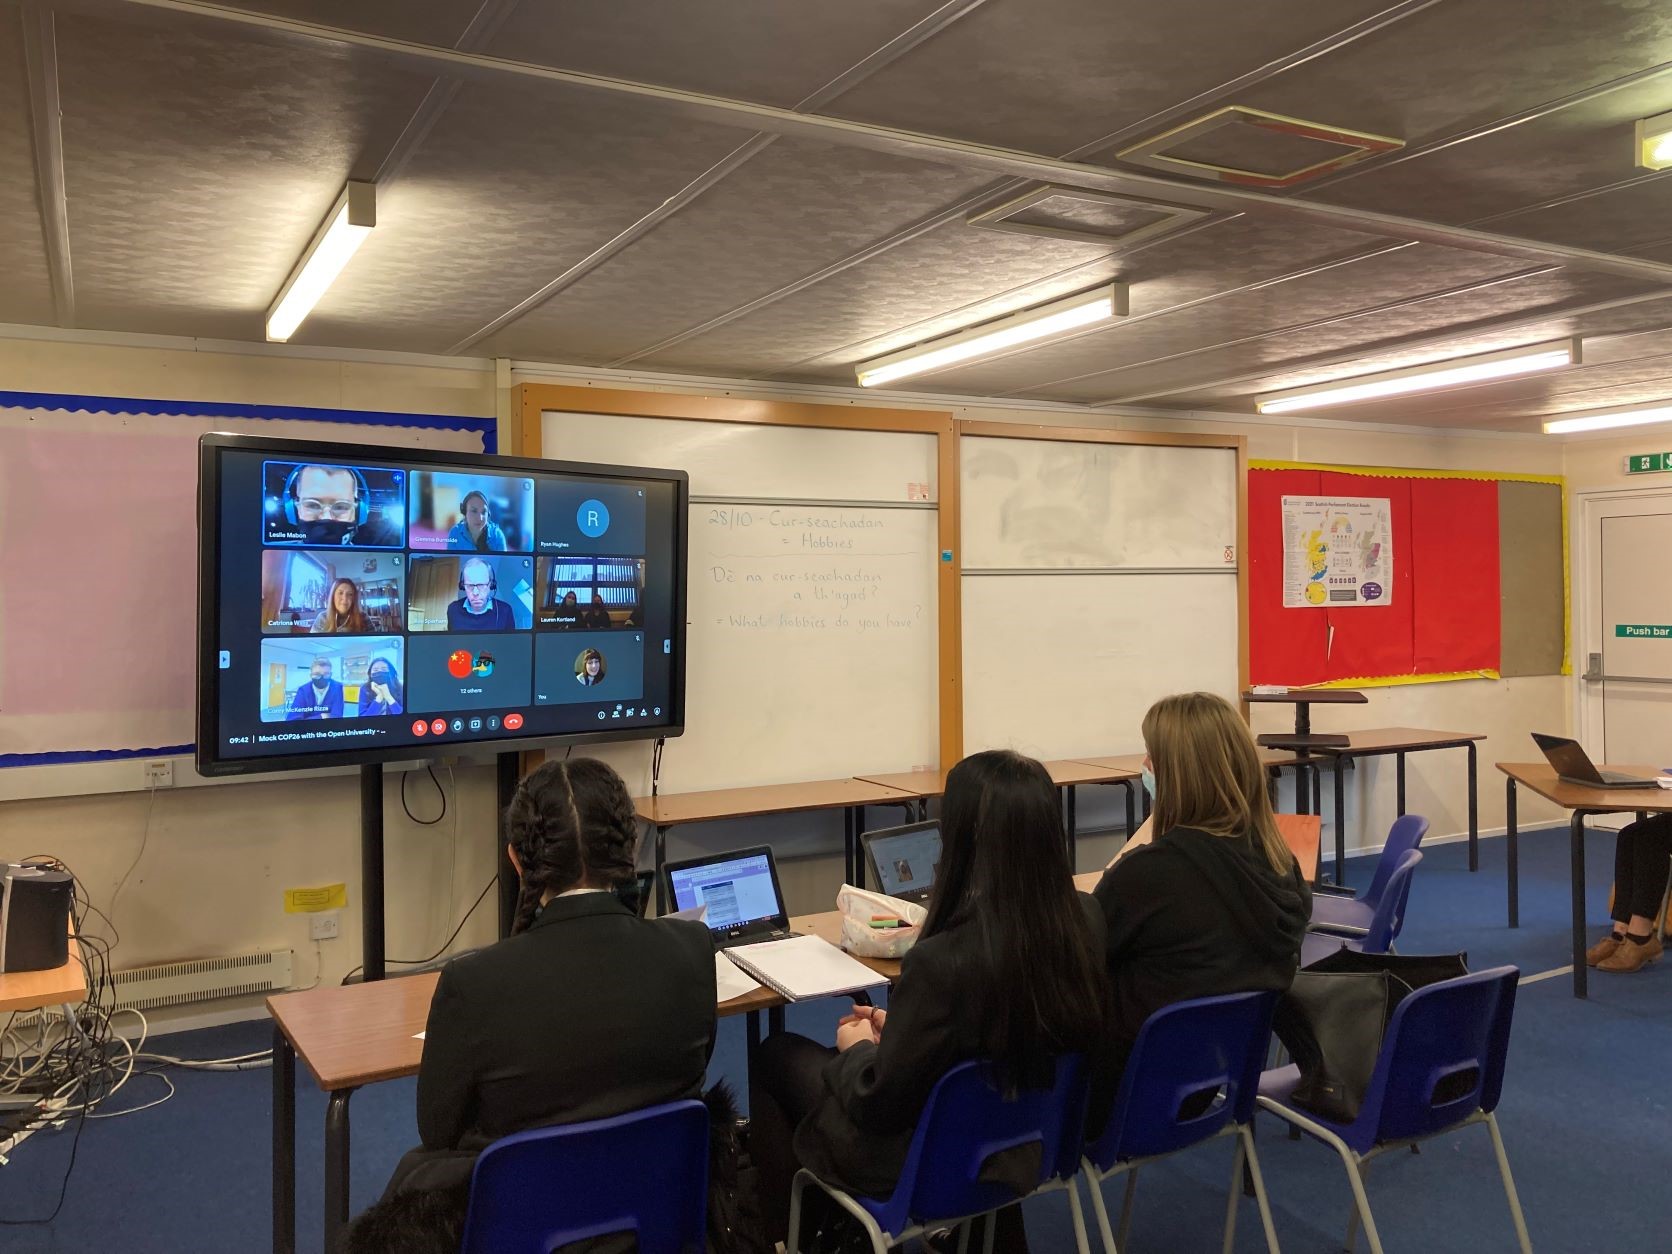 Pupils were thrilled to hear from Dr Leslie Mabon, Lecturer in Environmental Systems at the Open University, live from the real COP26 negotiations.